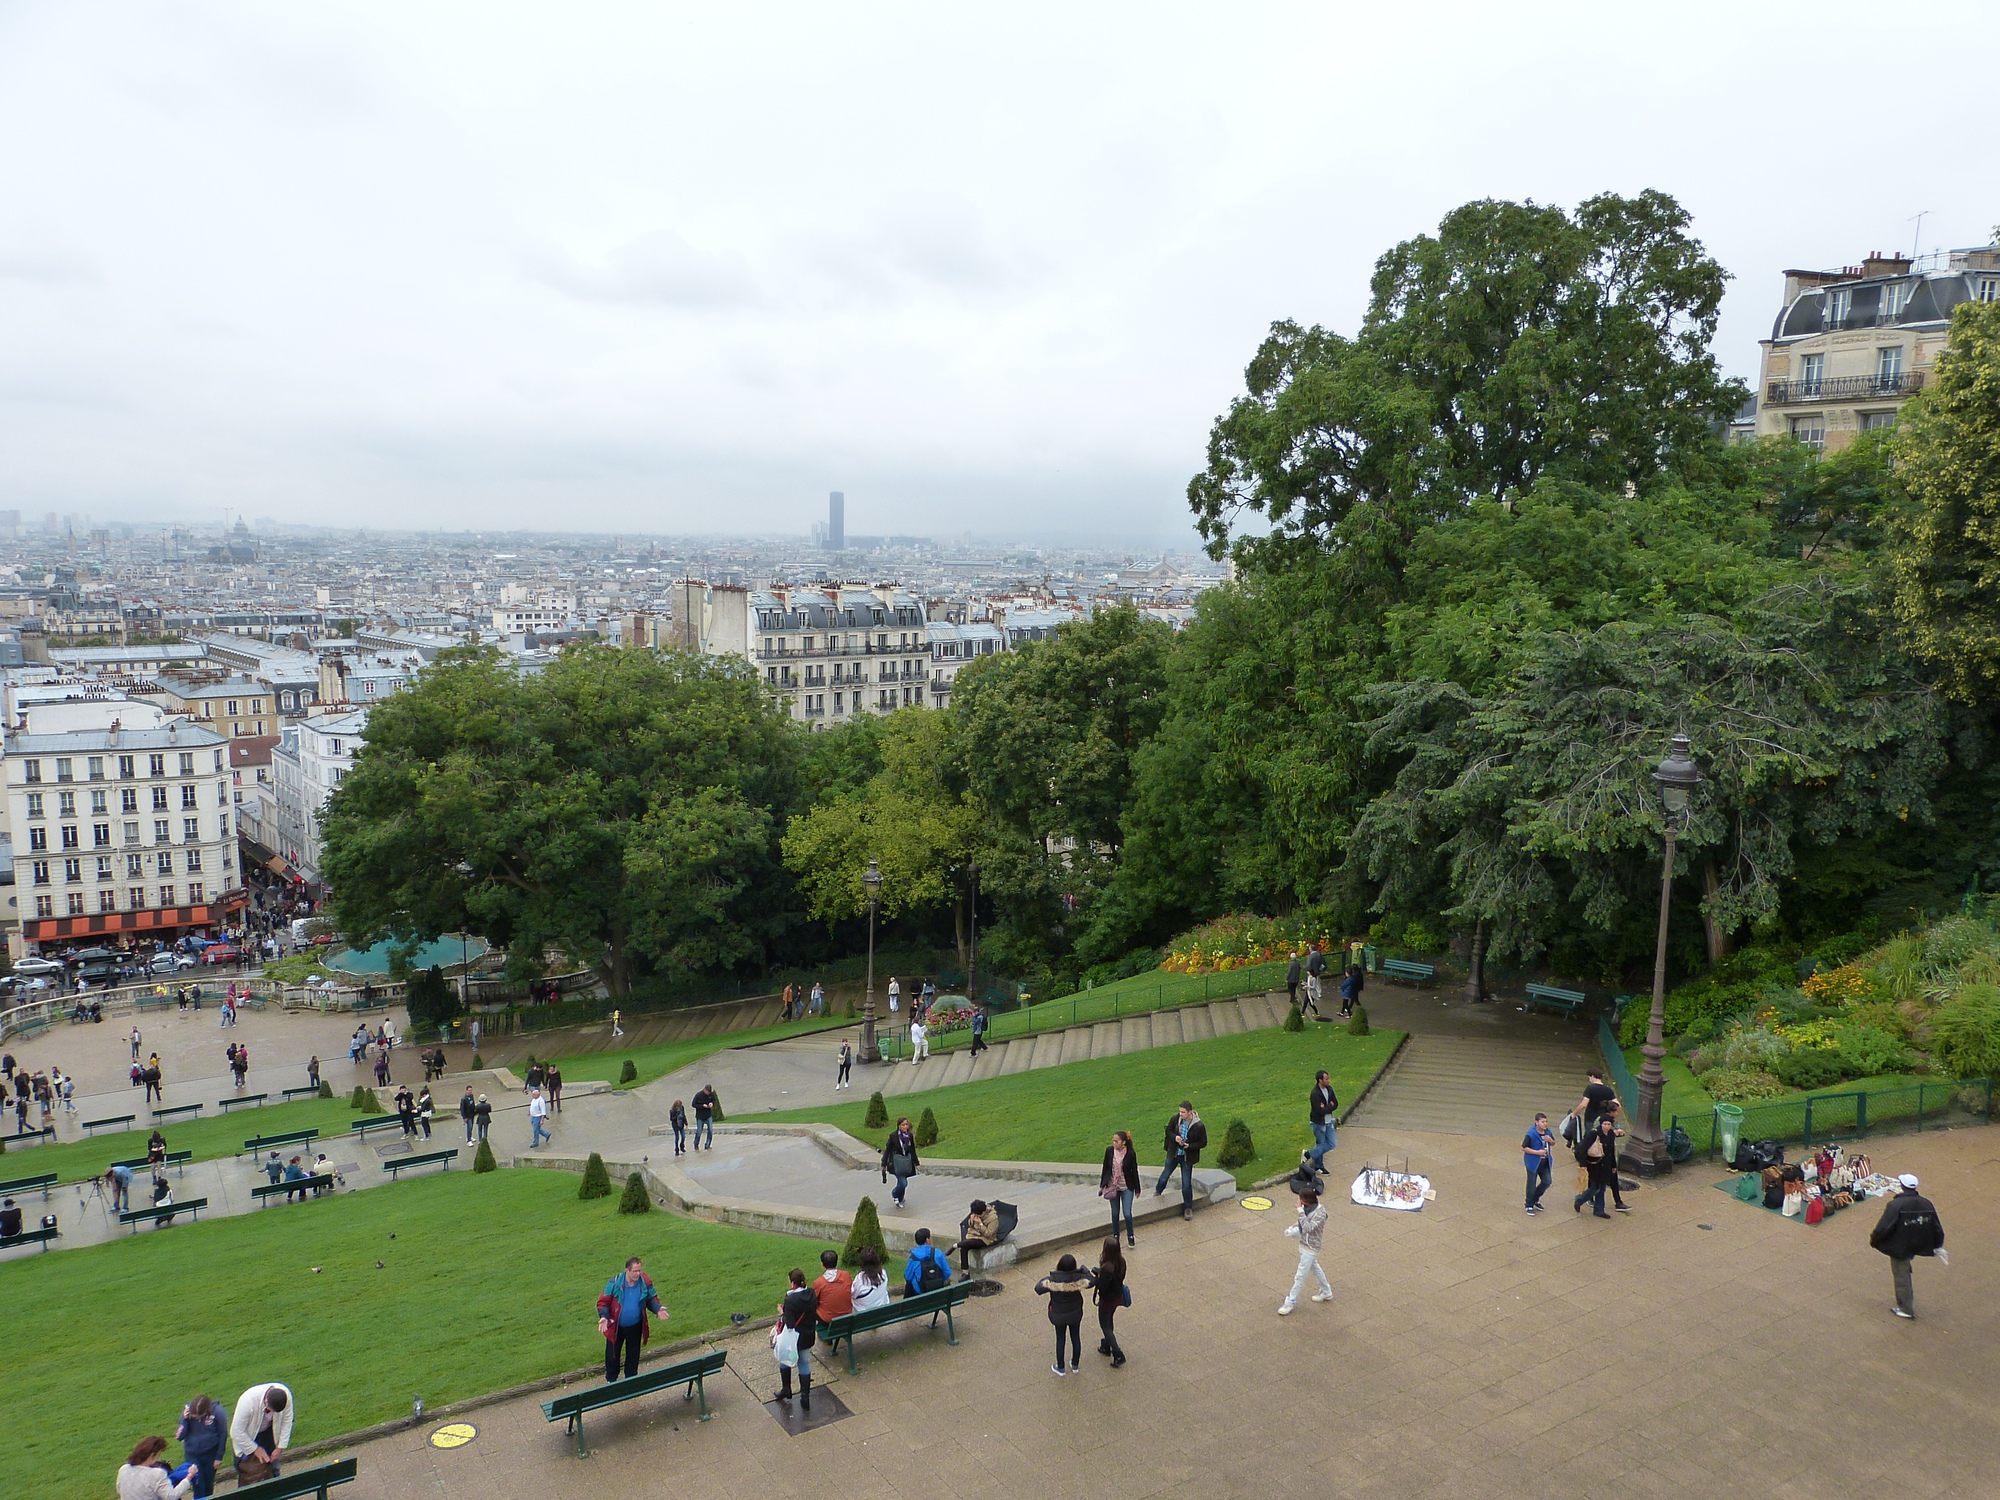 The park up to Sacre Coeur